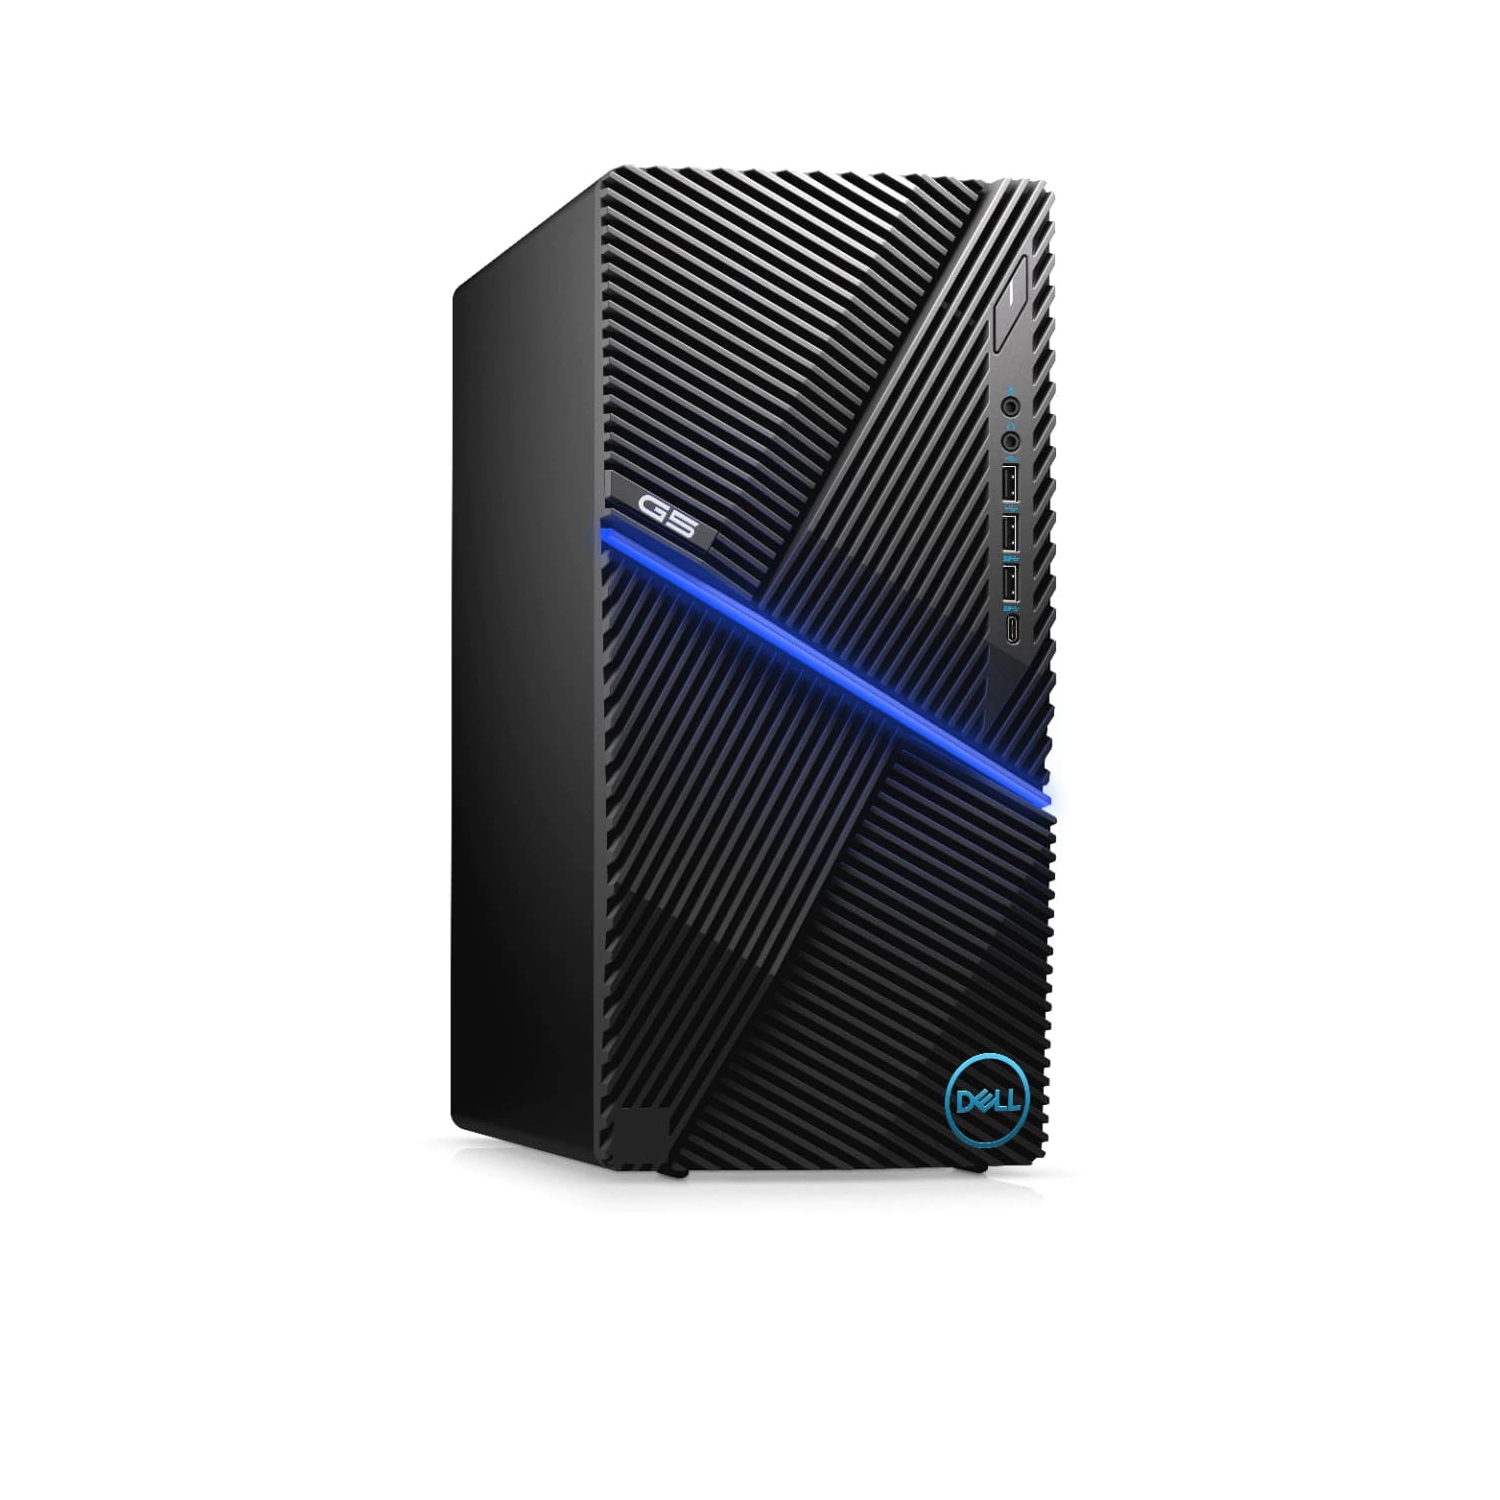 Refurbished (Excellent) - Dell G5 5000 Gaming Desktop (2020) | Core i7 - 1TB SSD - 16GB RAM - 2070 Super | 8 Cores @ 5.1 GHz - 10th Gen CPU Certified Refurbished